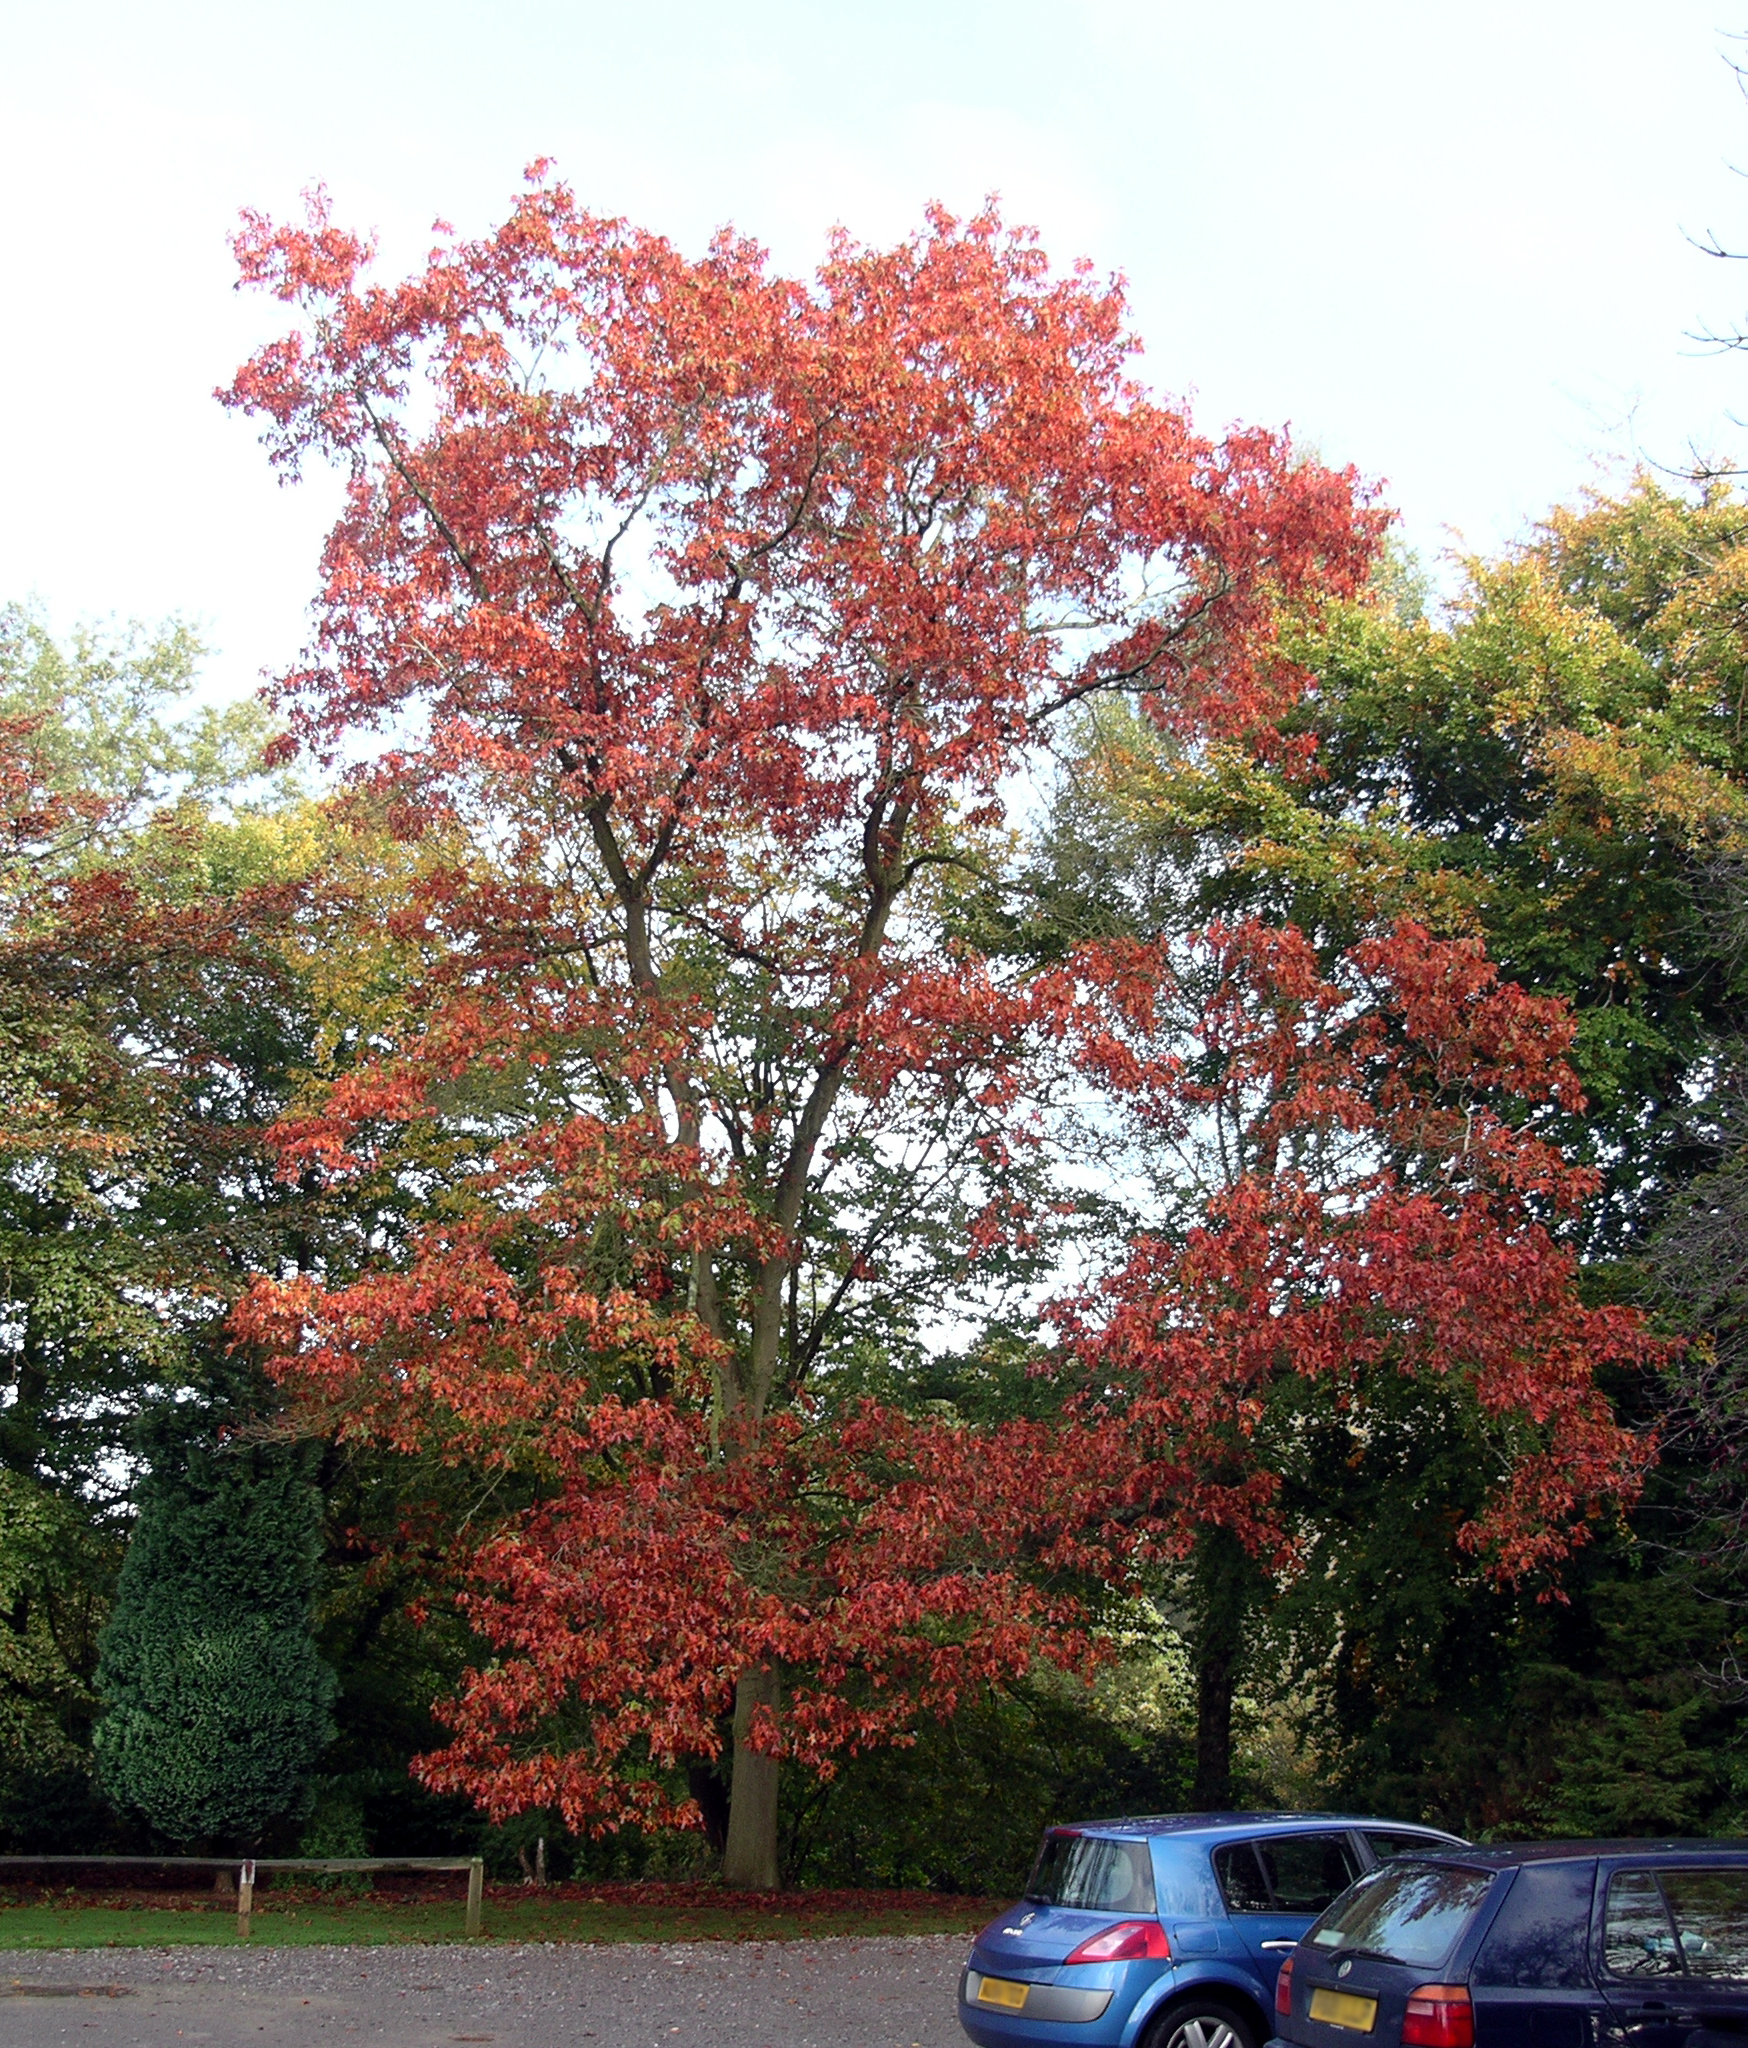 The quercus rubra,  our well known and loved red oak